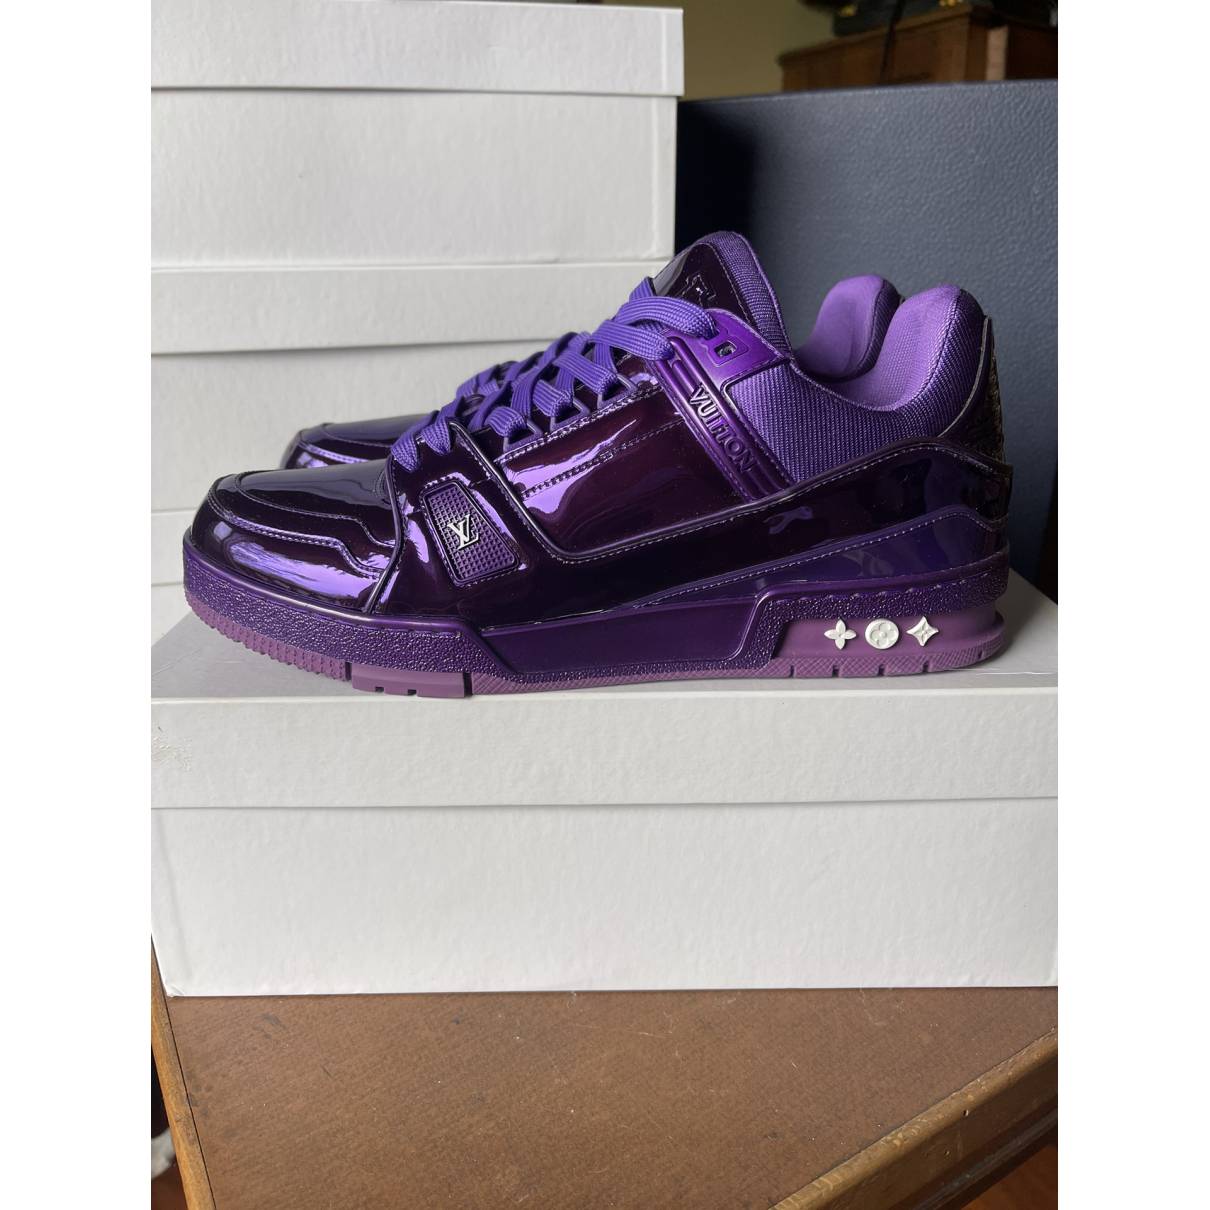 Lv trainer patent leather low trainers Louis Vuitton Purple size 9 US in  Patent leather - 33380005